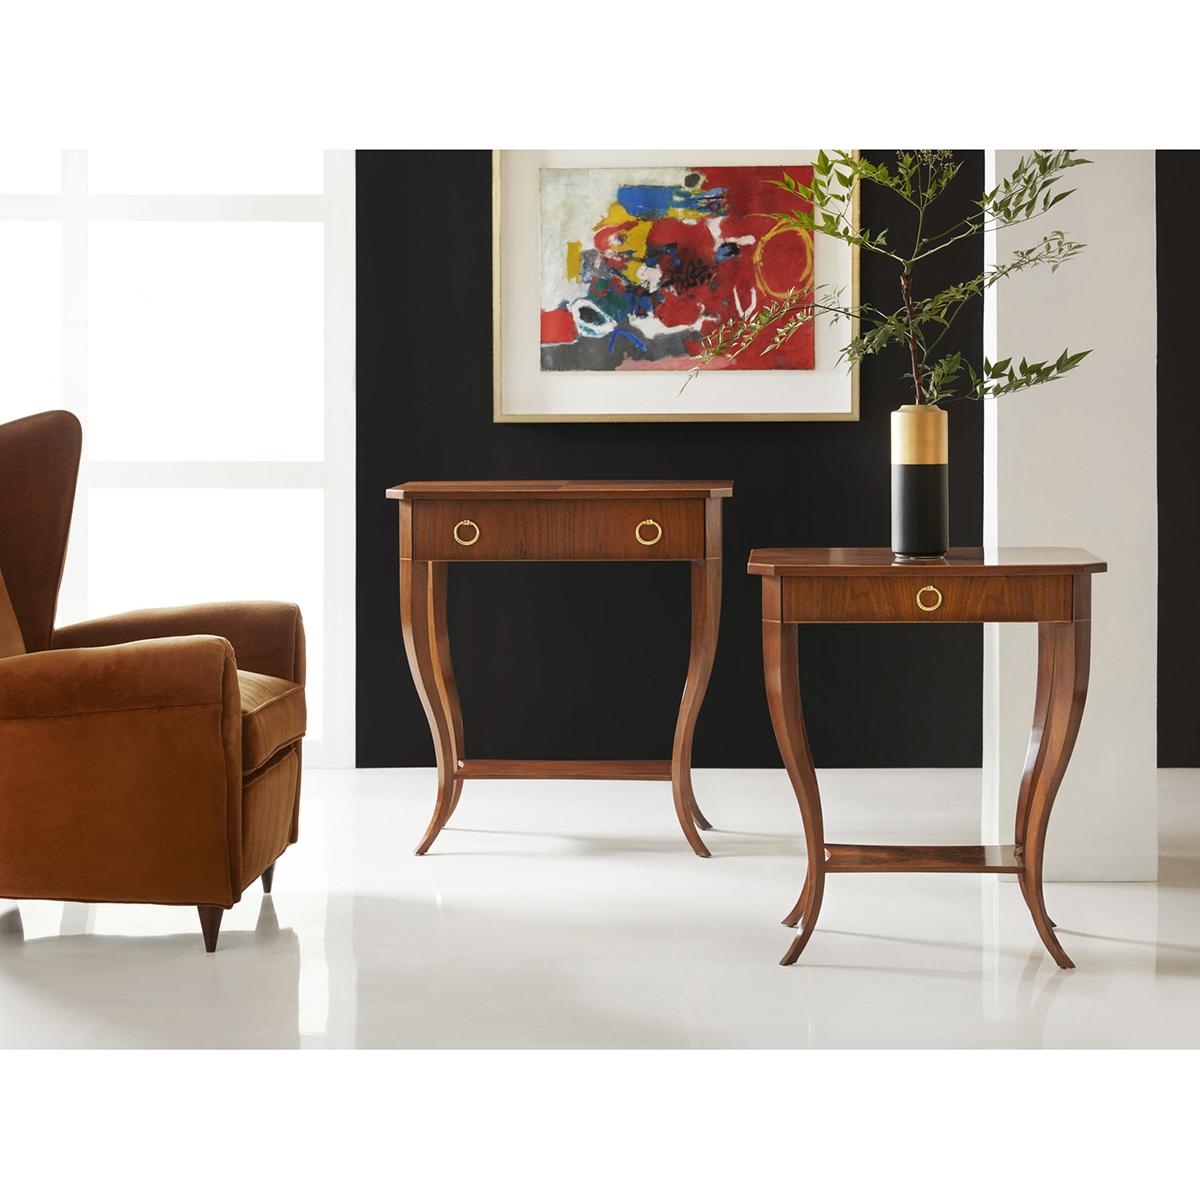 This walnut Biedermeier Nightstand is the perfect blend of modern and classic styles, with its clean lines and warm polished figured walnut veneers.

The delicate curves of the table create a feminine touch that is perfect for contemporary homes.